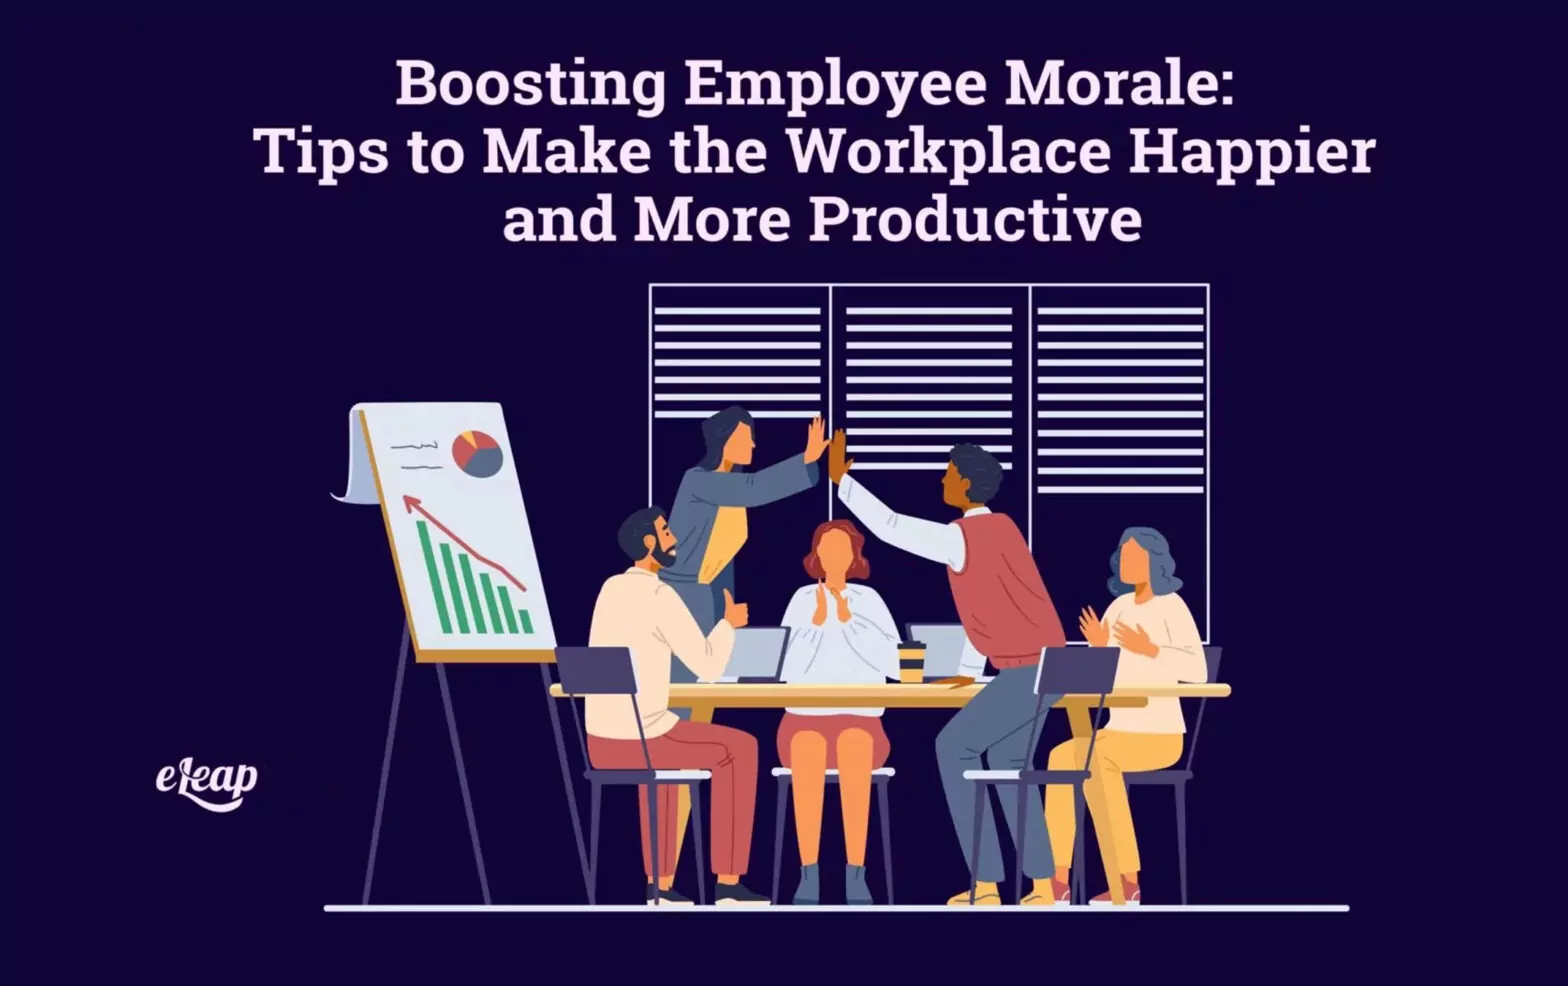 Boosting Employee Morale: Tips to Make the Workplace Happier and More Productive